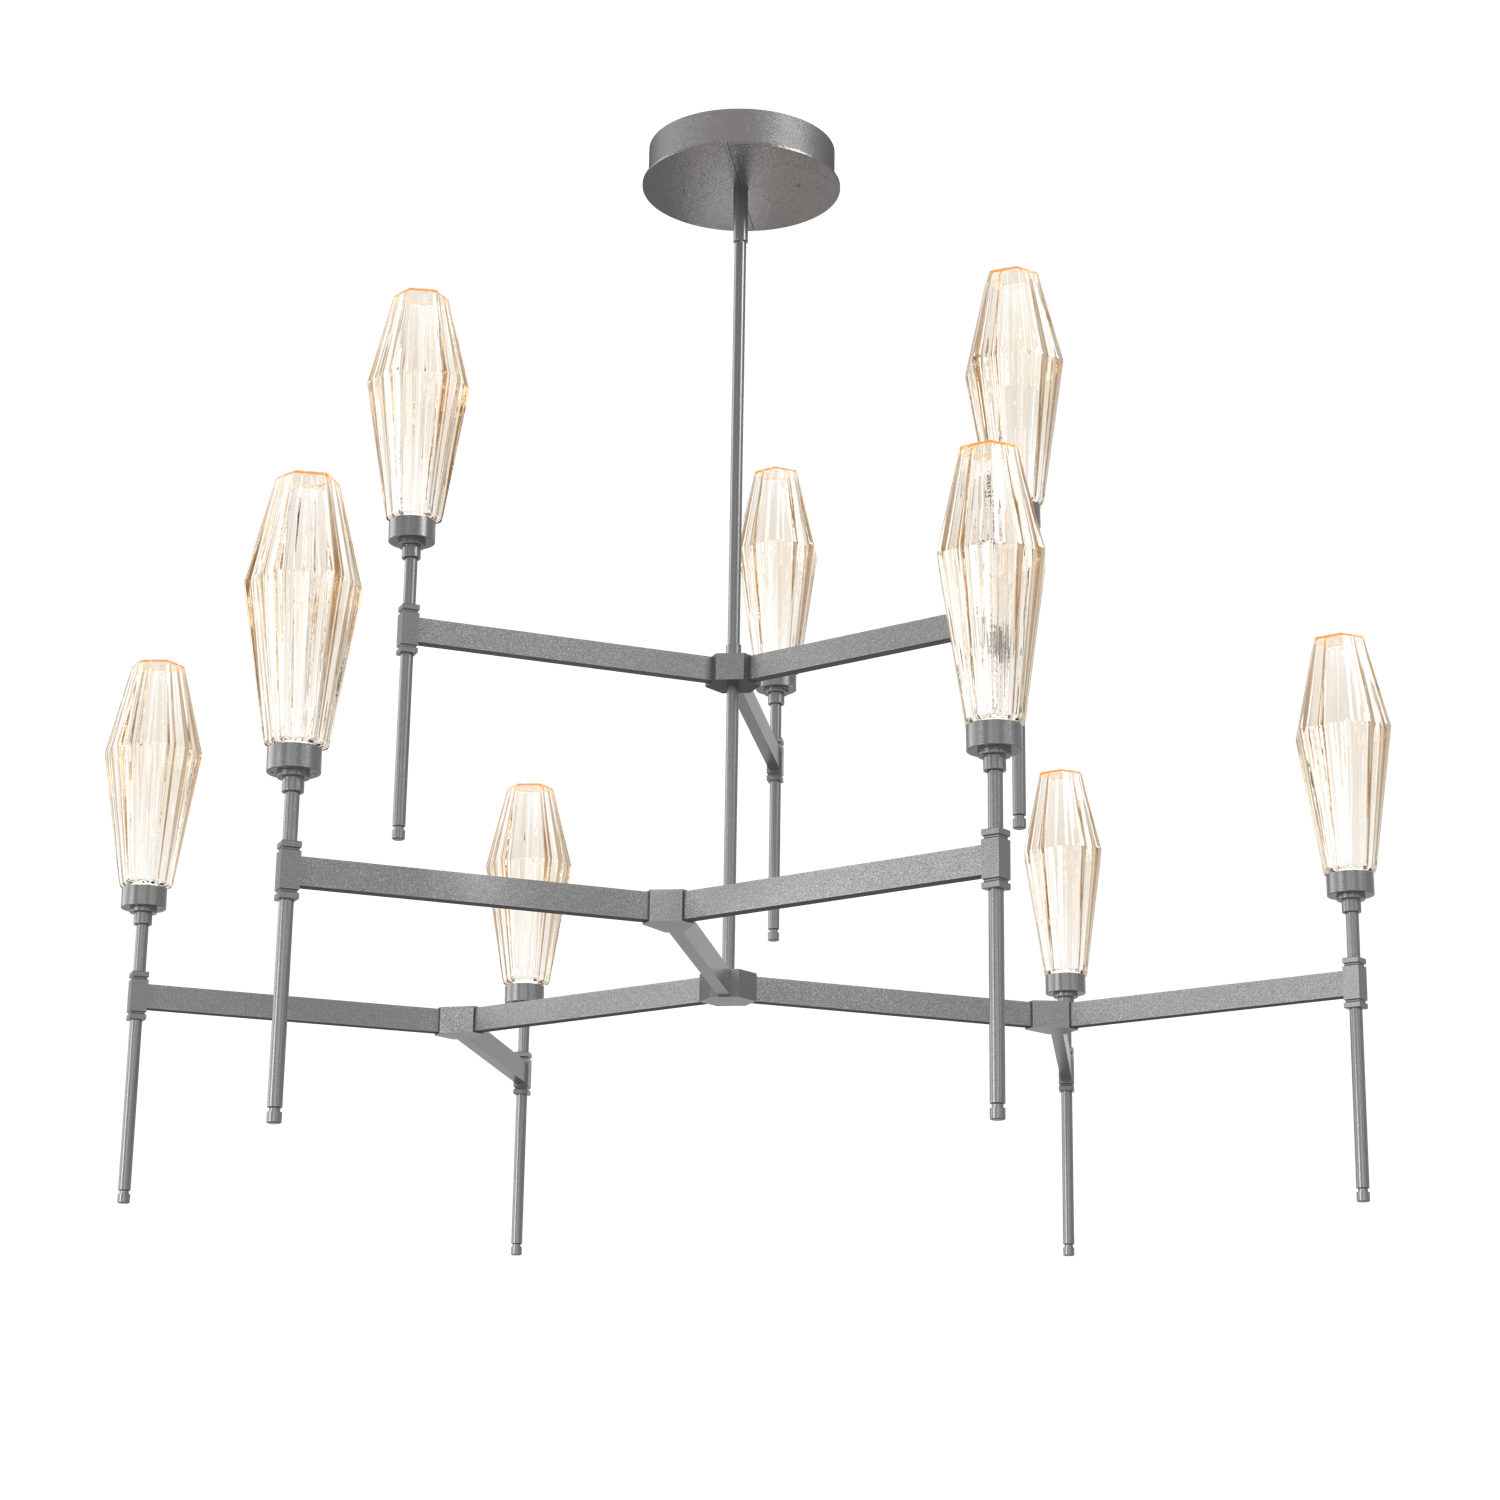 CHB0049-54-GP-RA-Hammerton-Studio-Aalto-54-inch-round-two-tier-belvedere-chandelier-with-graphite-finish-and-optic-ribbed-amber-glass-shades-and-LED-lamping